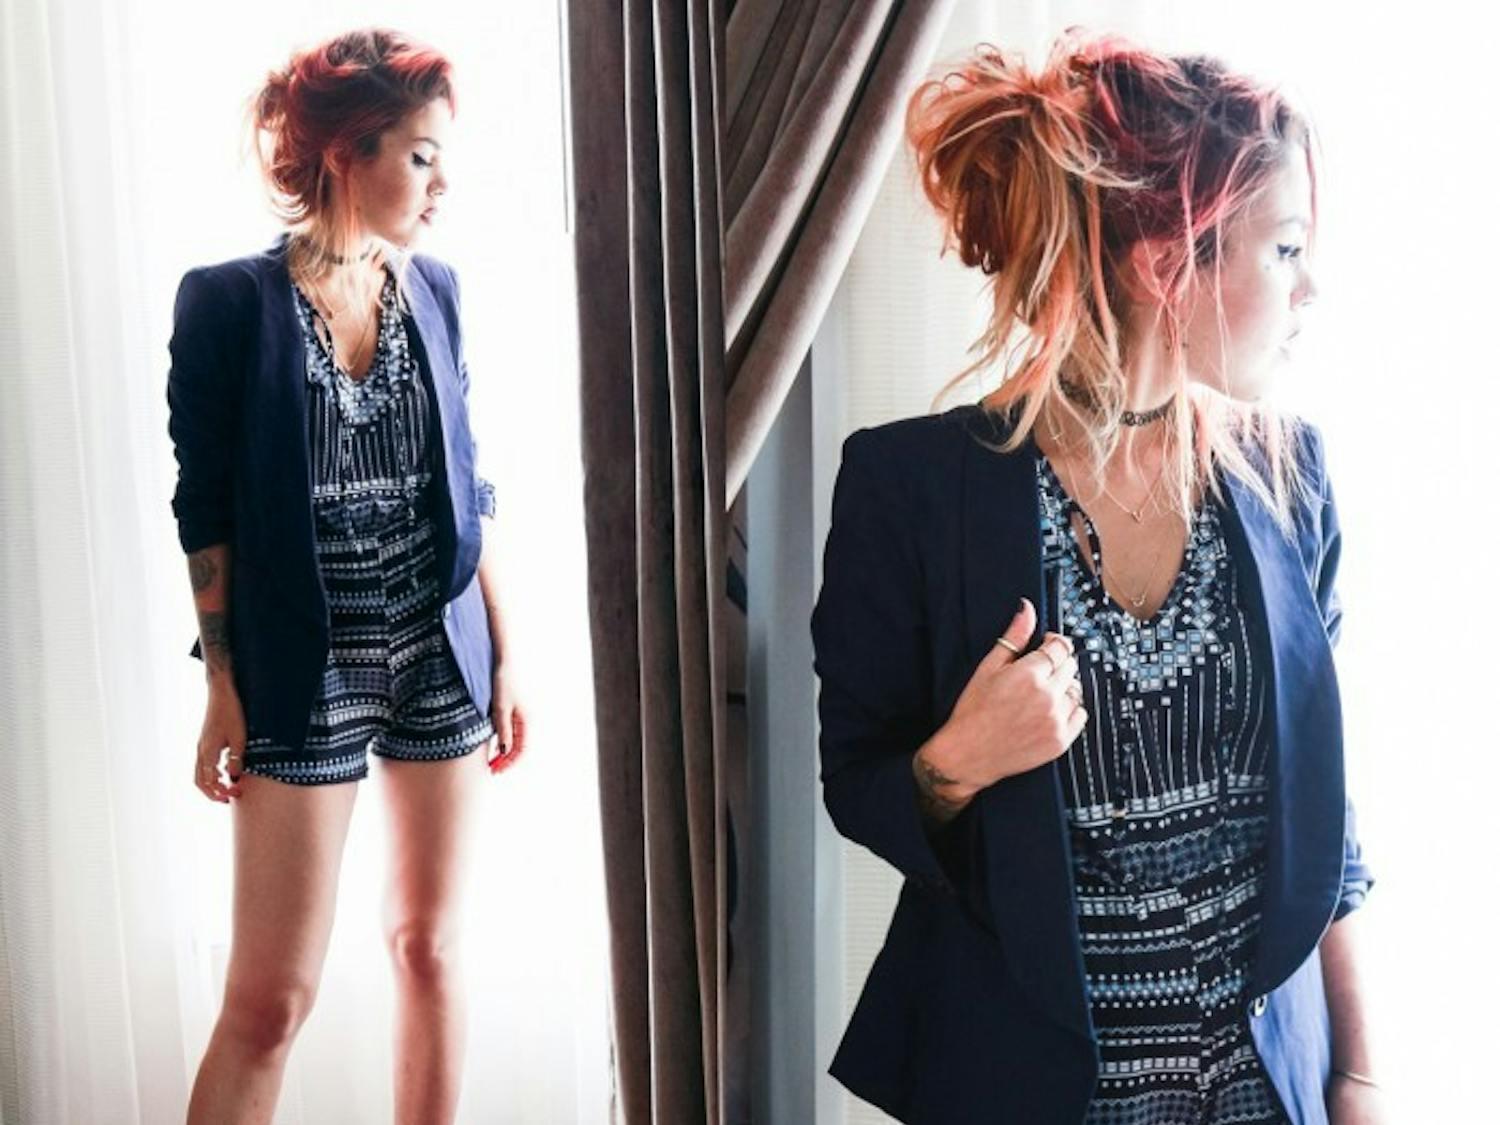 Luanna P's style is all about layering--shirts under shirts, all under jackets.